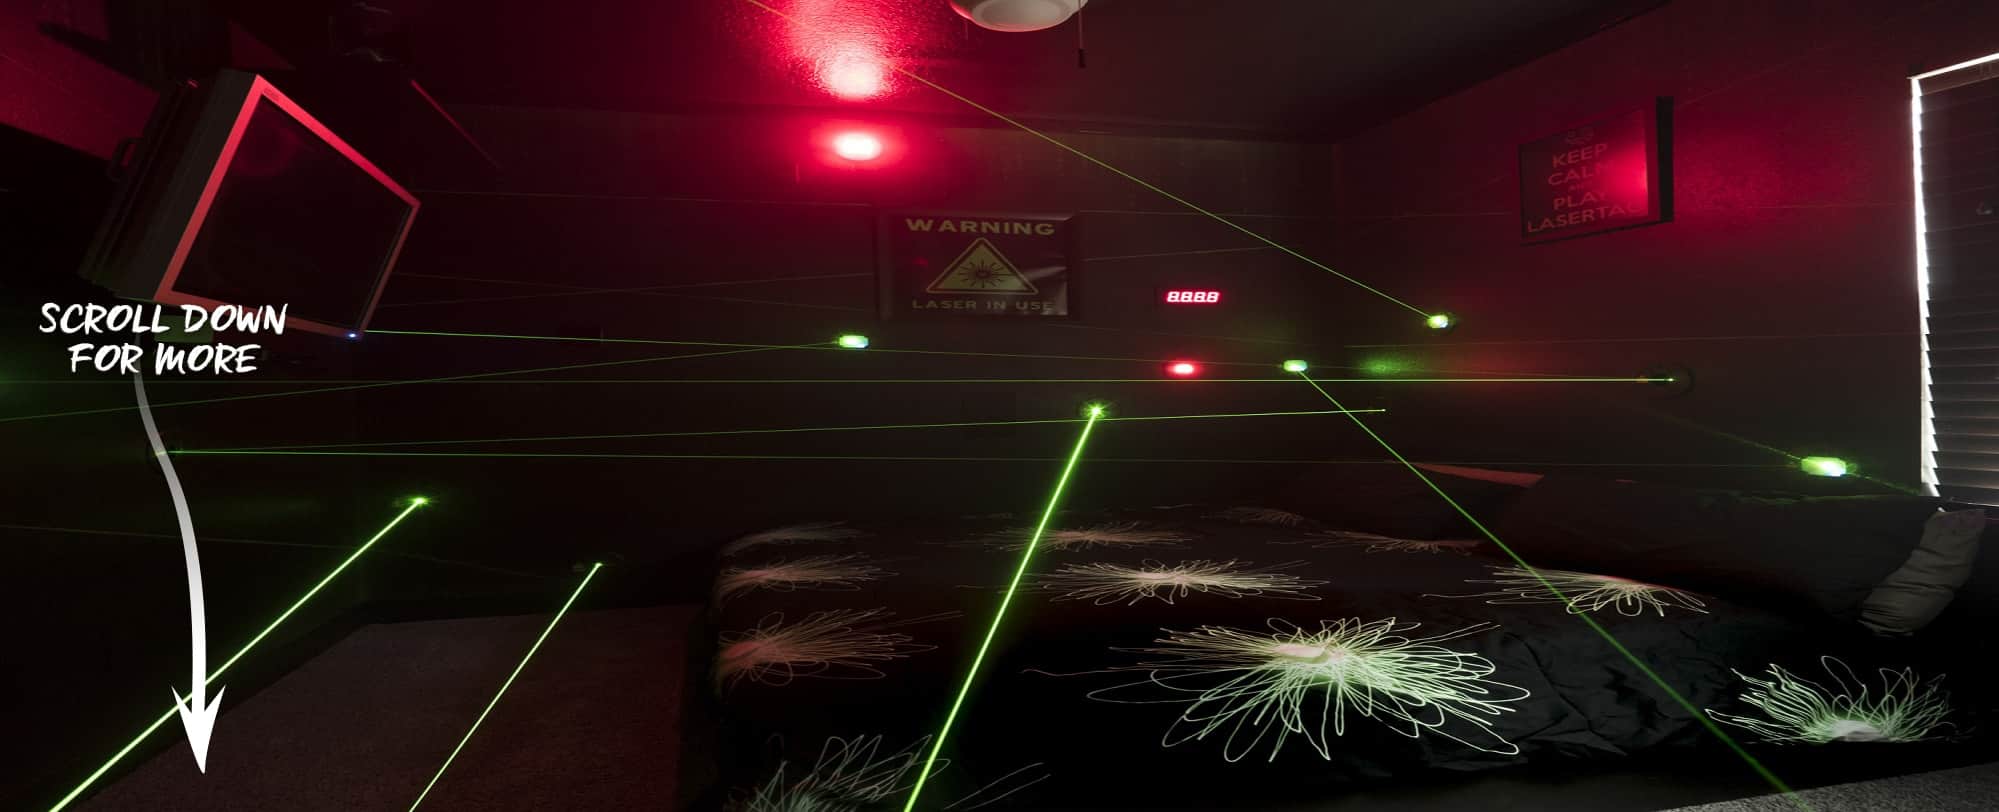 Laser Maze at The Great Escape Lakeside - managed by Orlando Area Luxury (Vacation) Rentals